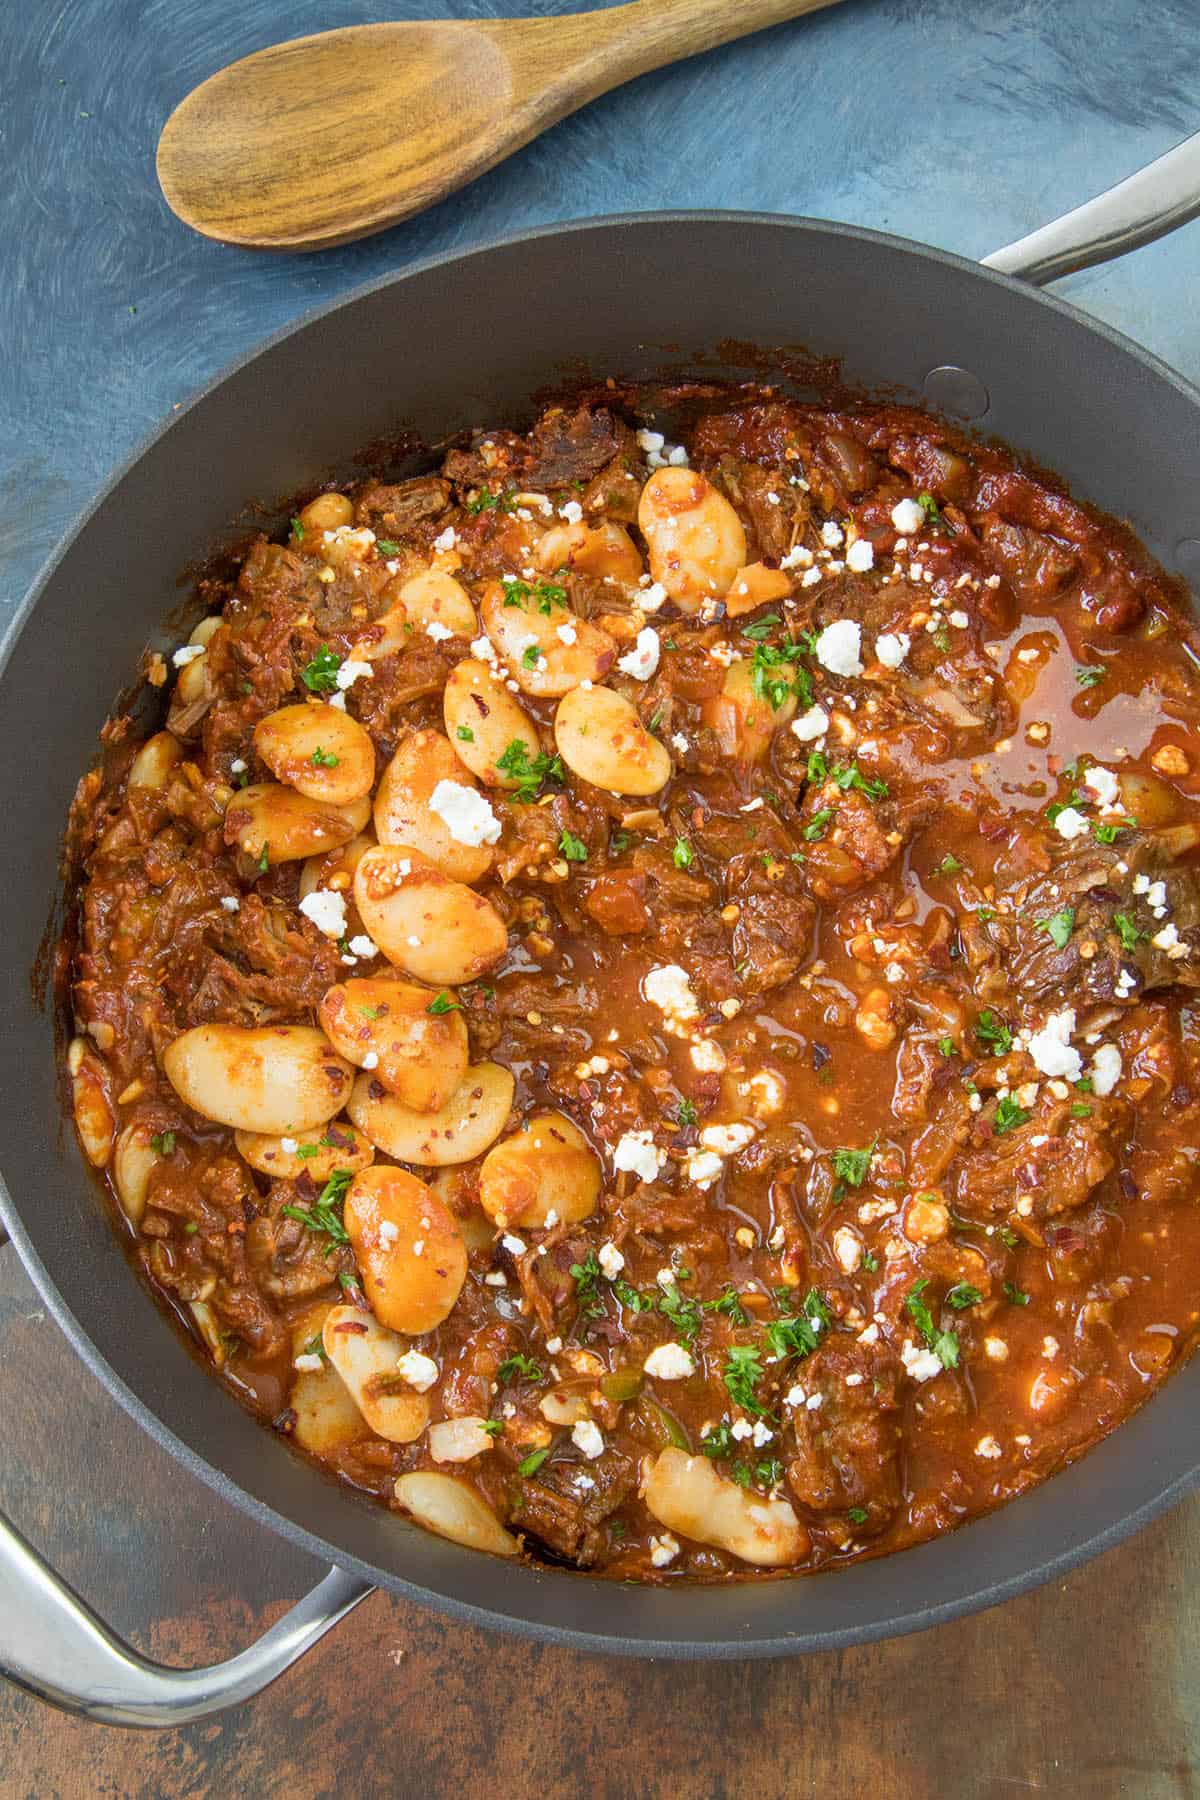 Chili Colorado - a version of the dish with beans